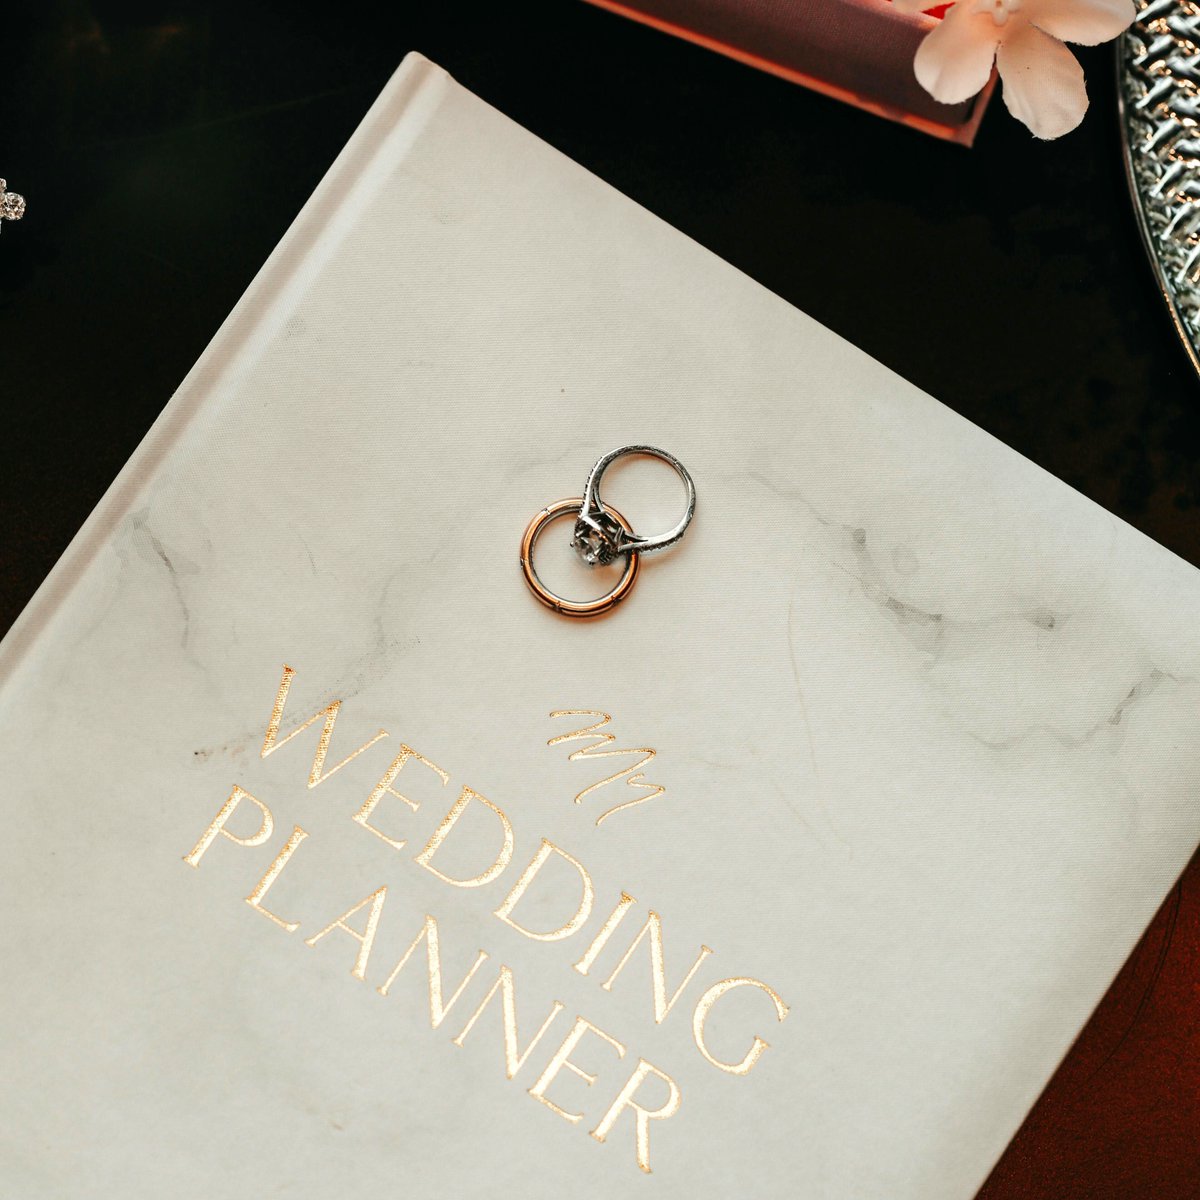 Have you been using the long weekend for #wedding planning? It's a good idea to get your venue and celebrant booked as soon as you can to secure your chosen wedding date! 📆 Our humanist celebrants do get booked up in advance, especially on weekends and during the summer.